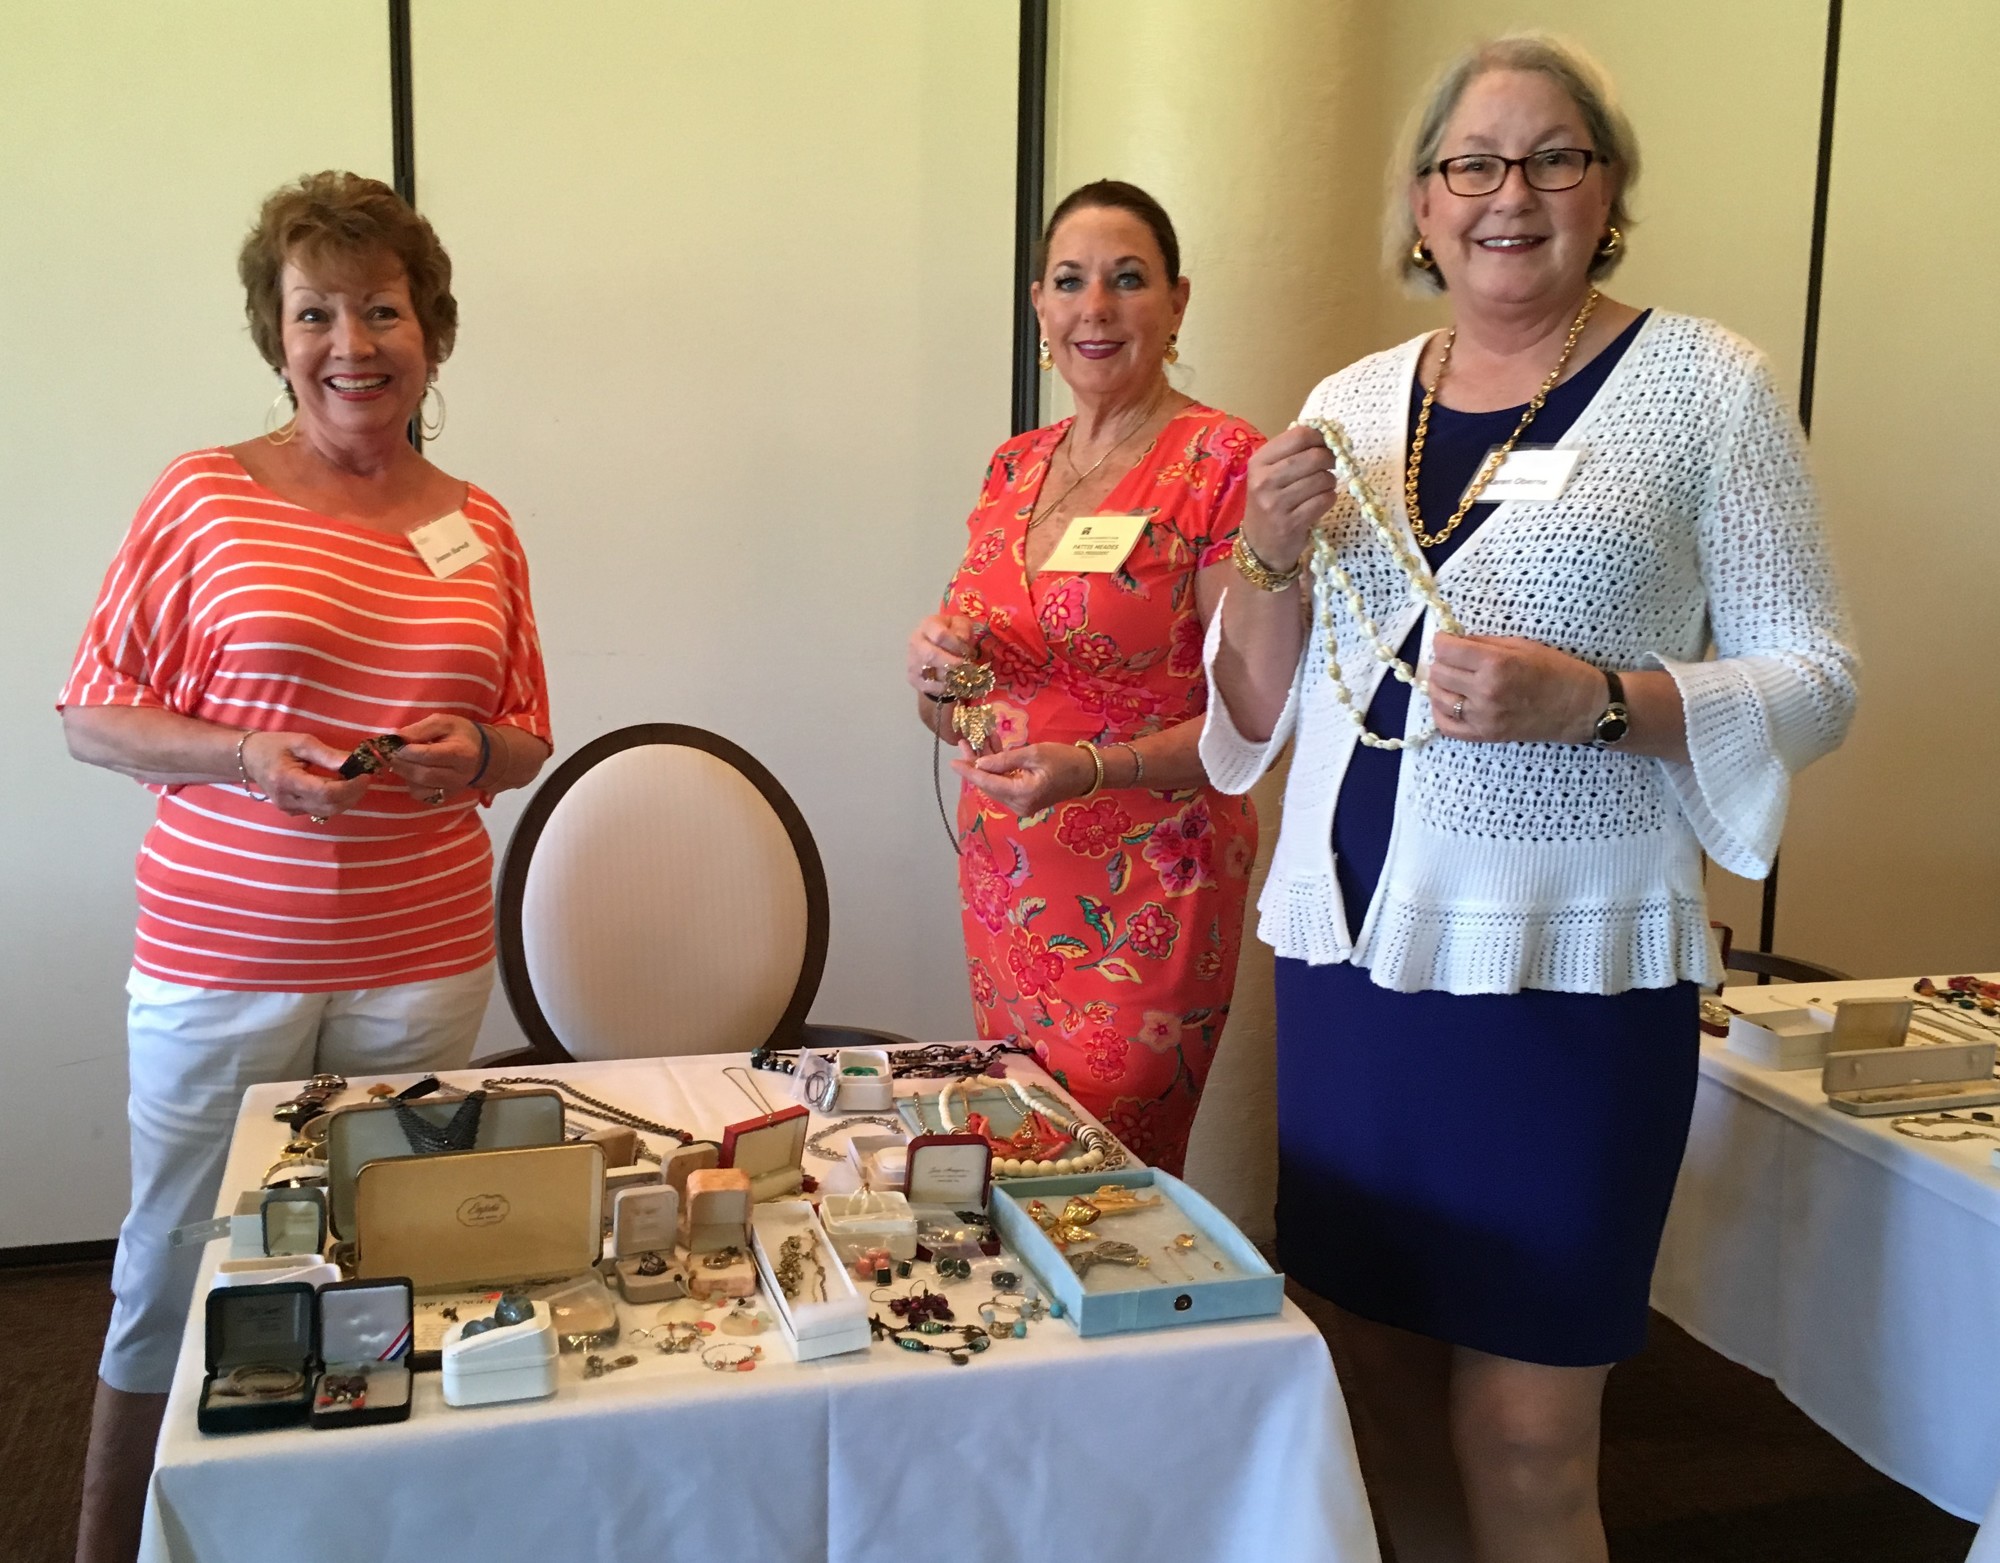 Joanne Harwell , Pattie Meades and Karen Oberne check out the jewelry for sale at the luncheon. Photo courtesy of Meg Garofalo.